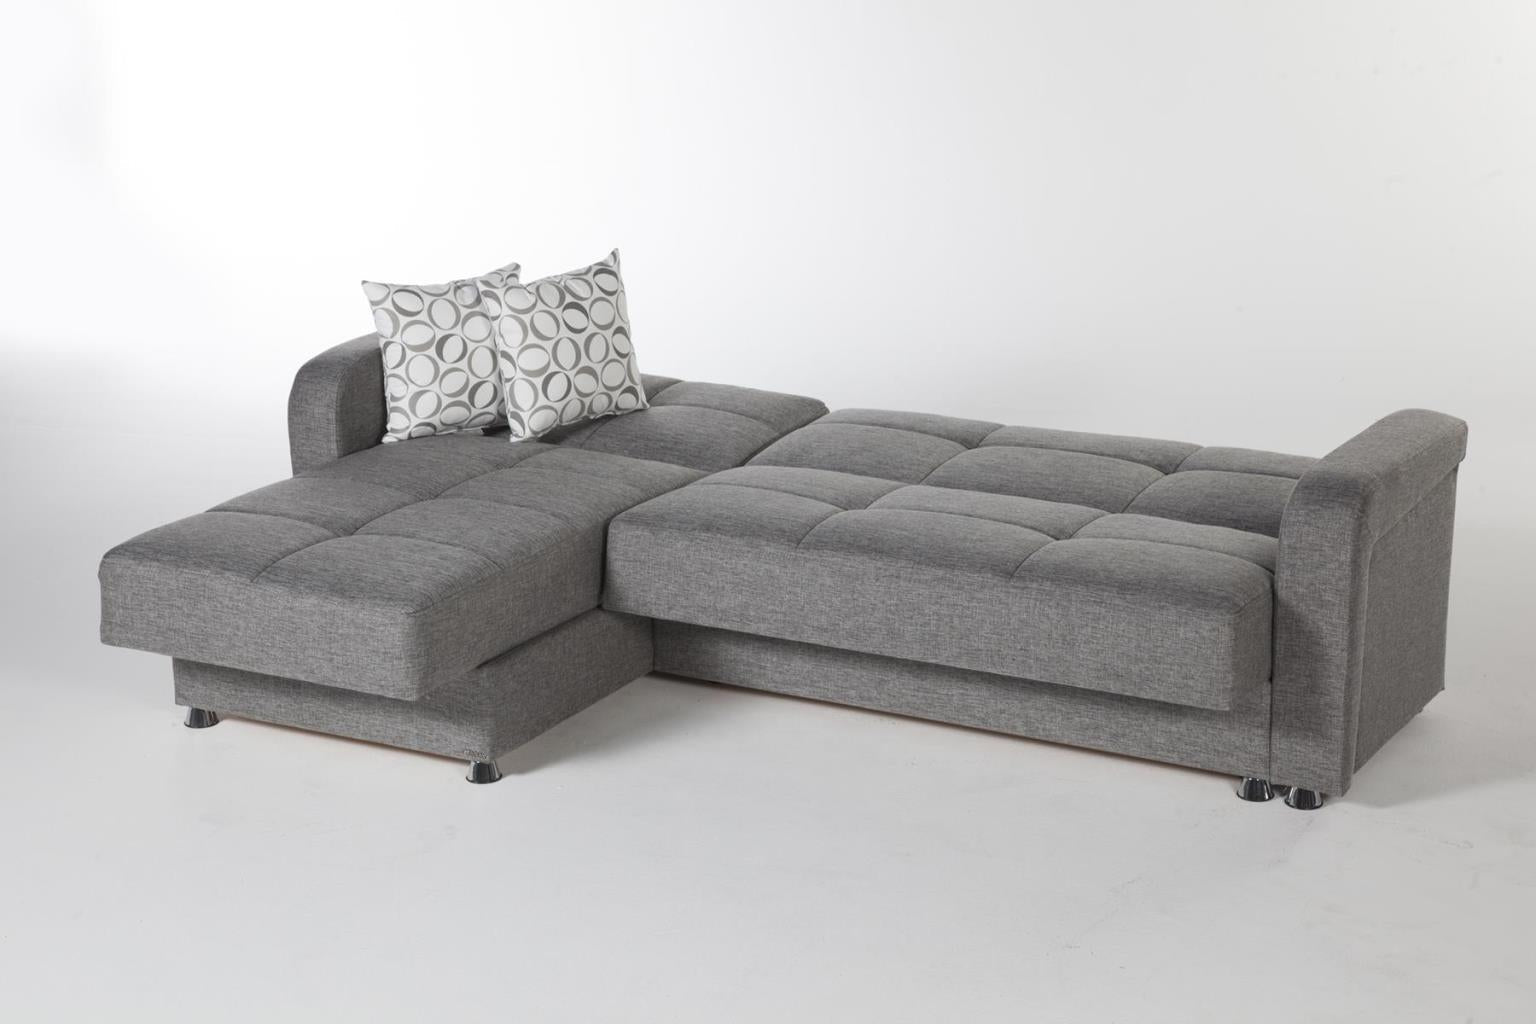 VISION SECTIONAL